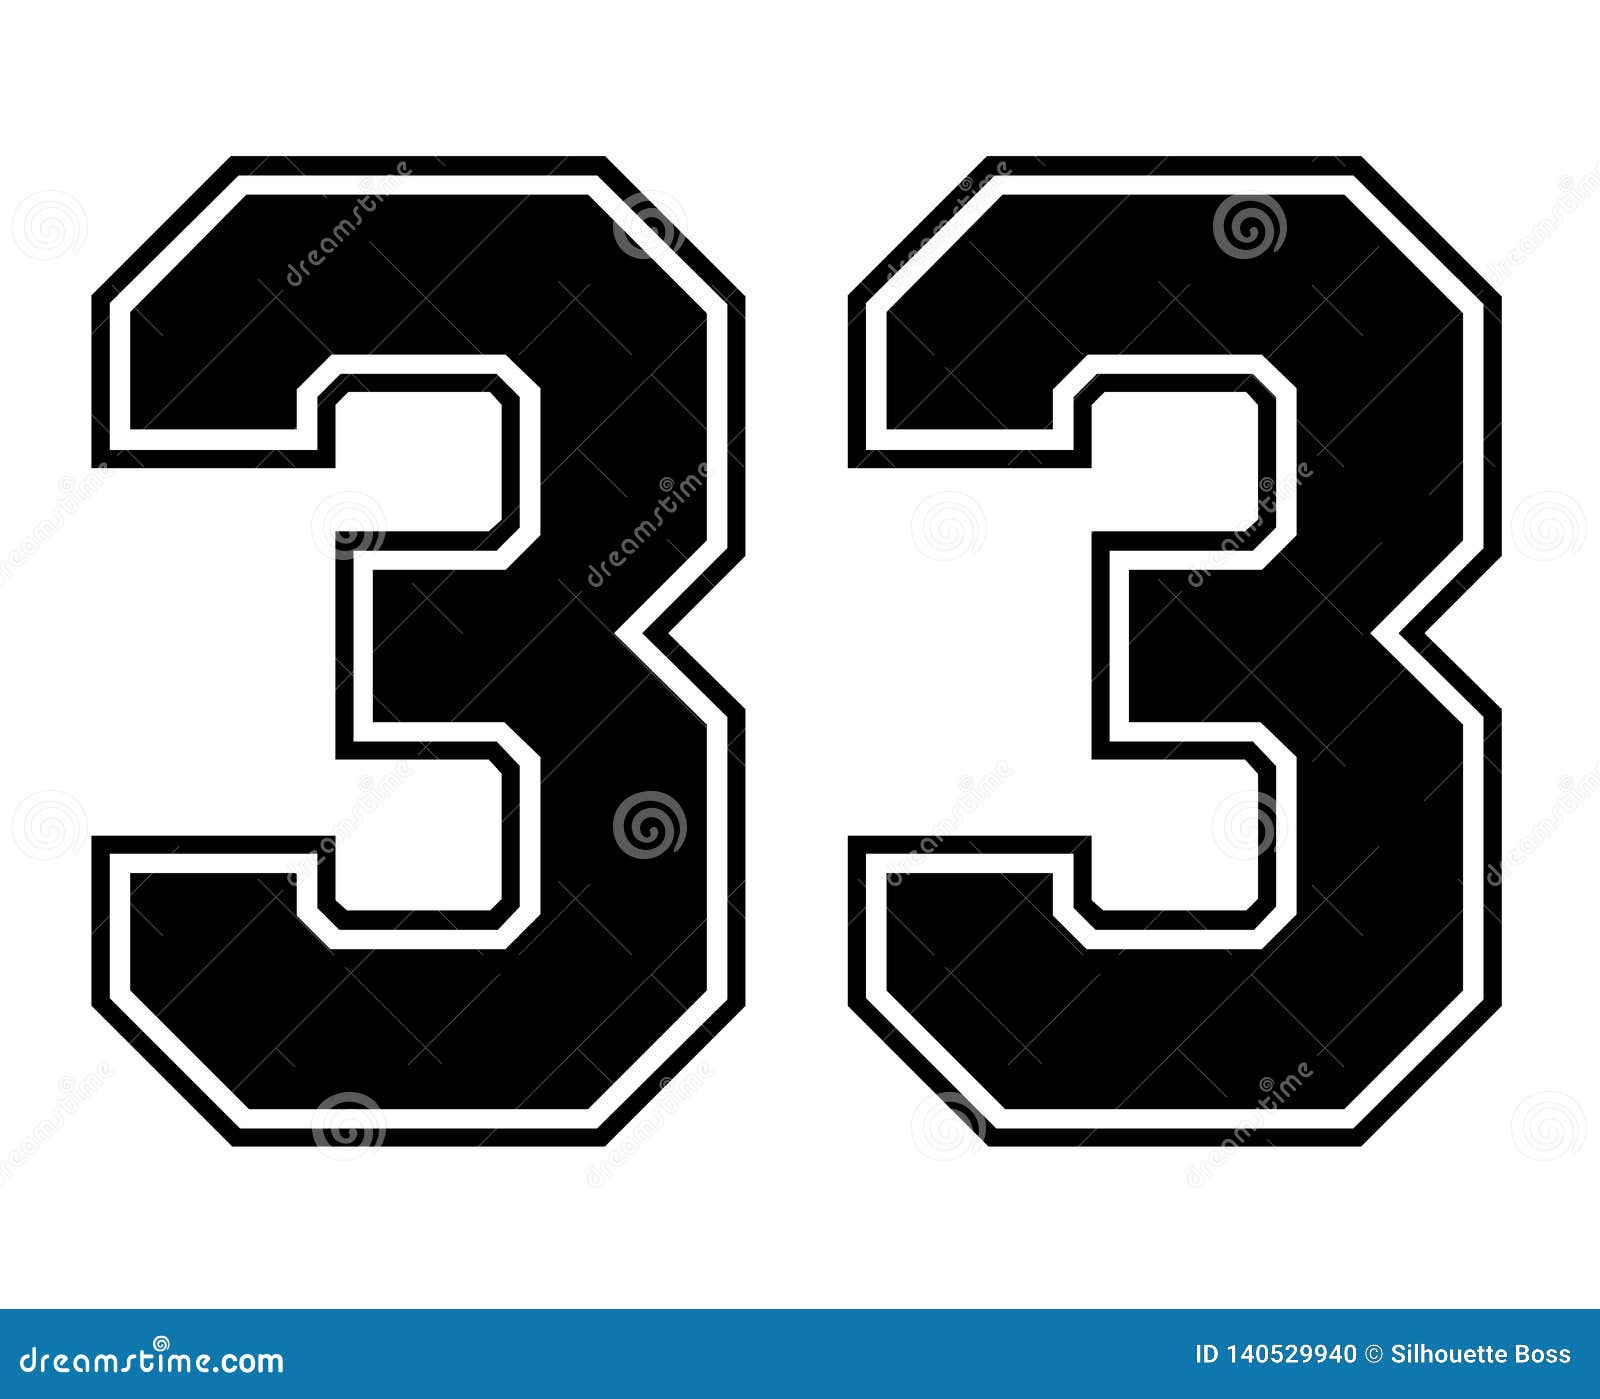 33 jersey number